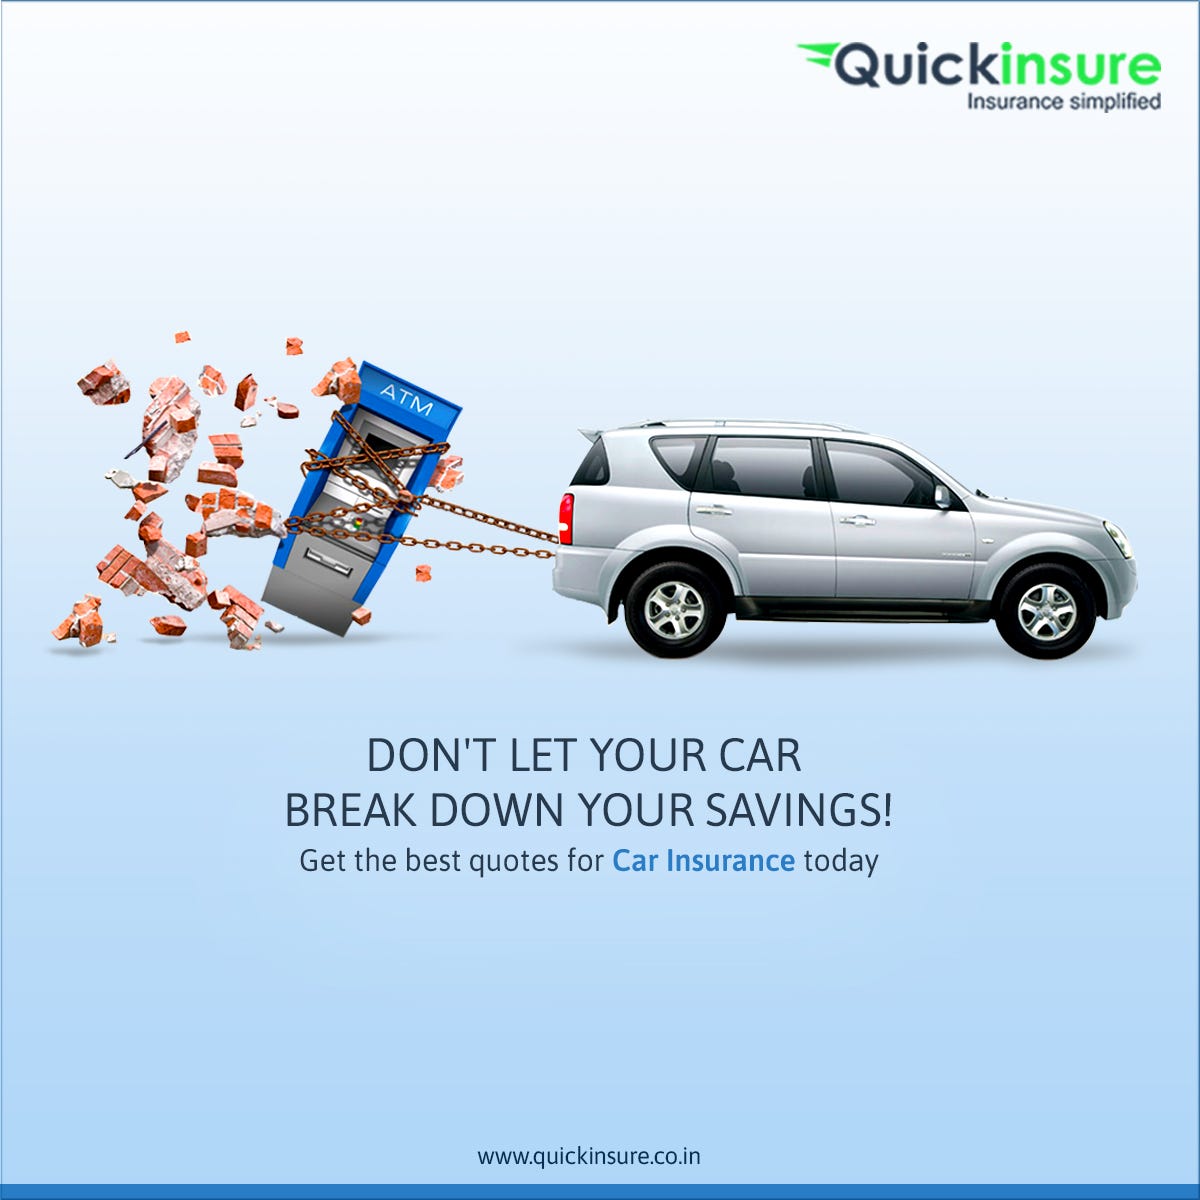 Step by Step Guide For Getting A Duplicate Copy Of Your Car Insurance Documents